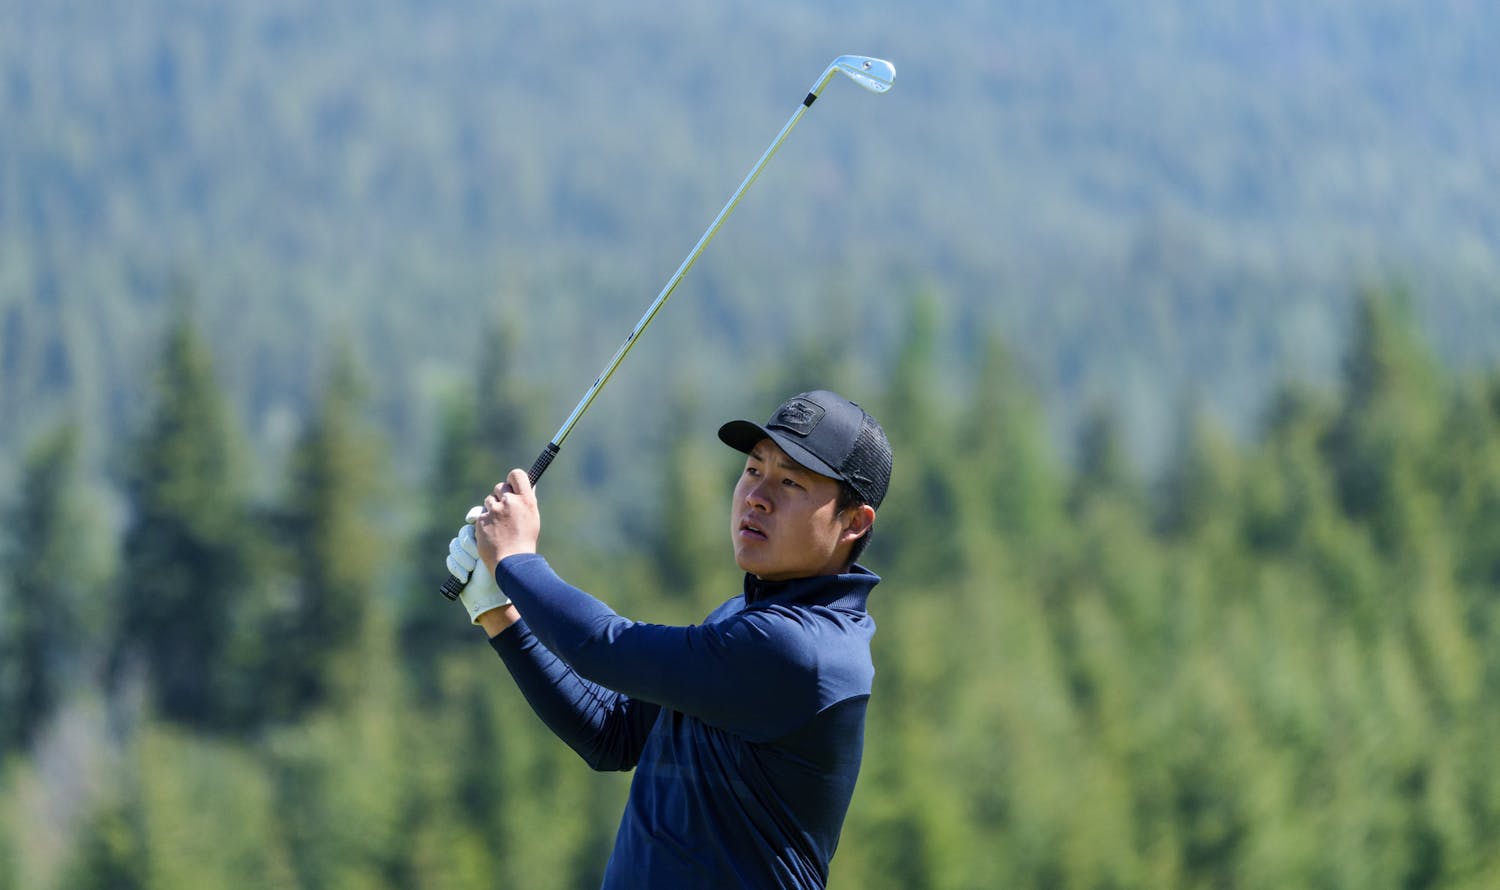 Florida&#x27;s Yuxin Lin of the Florida men&#x27;s golf team competes in the first round of the 2021 NCAA Cle Elum Regional at Tumble Creek Golf Club in Cle Elum, Wash., on May 19, 2021. (Photography by Stephen Brashear/Red Box Pictures)